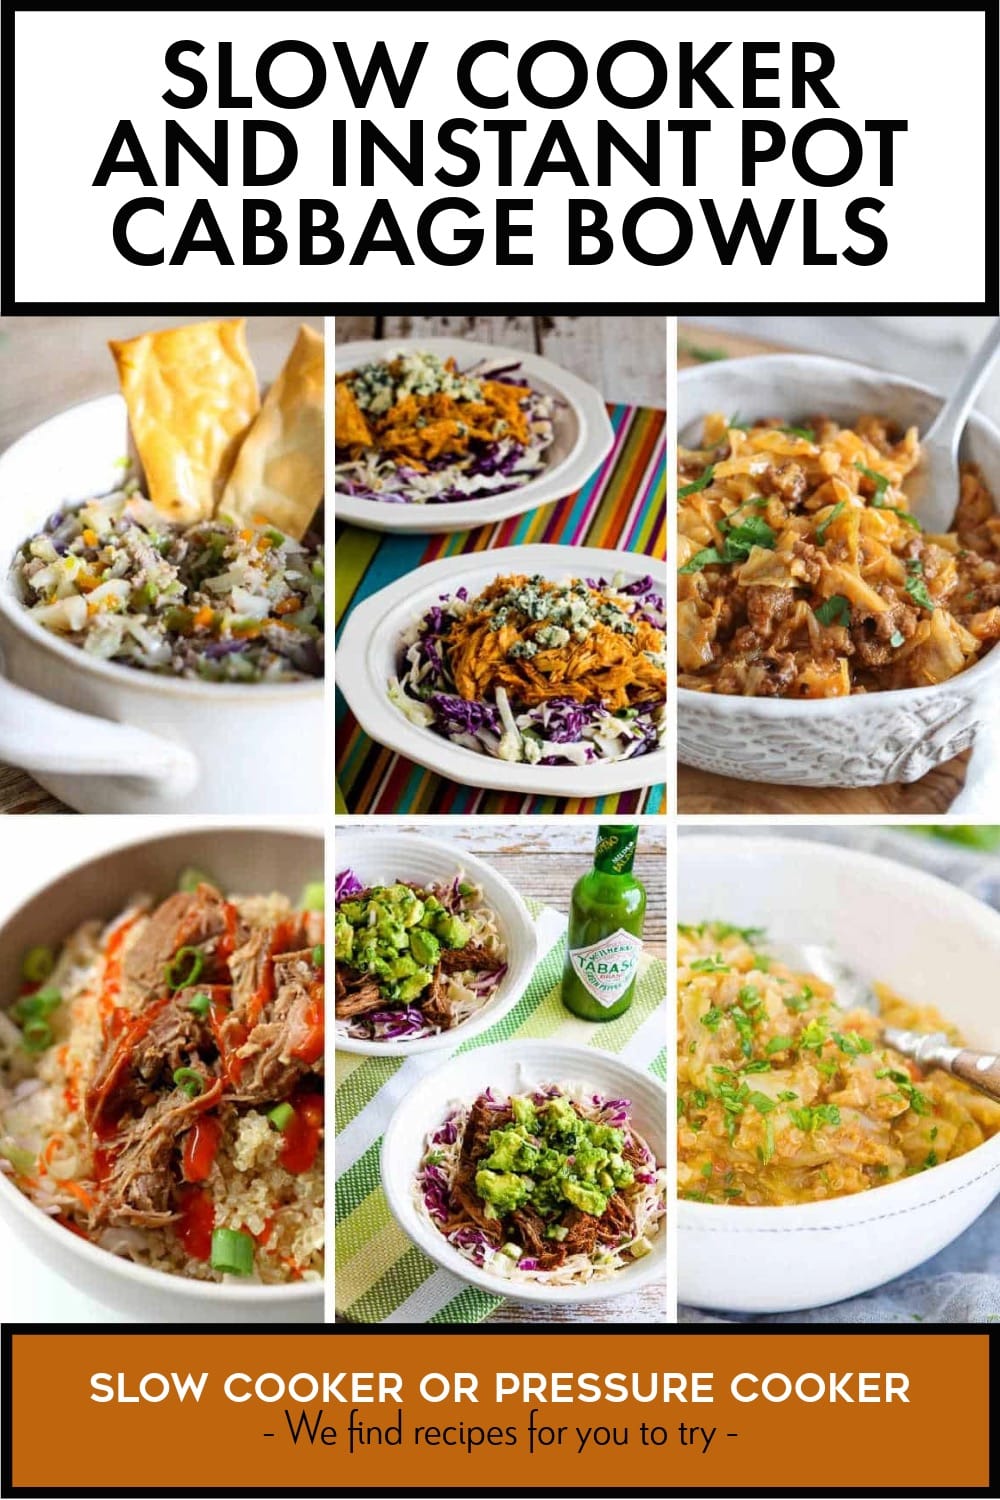 Pinterest image of Slow Cooker and Instant Pot Cabbage Bowls